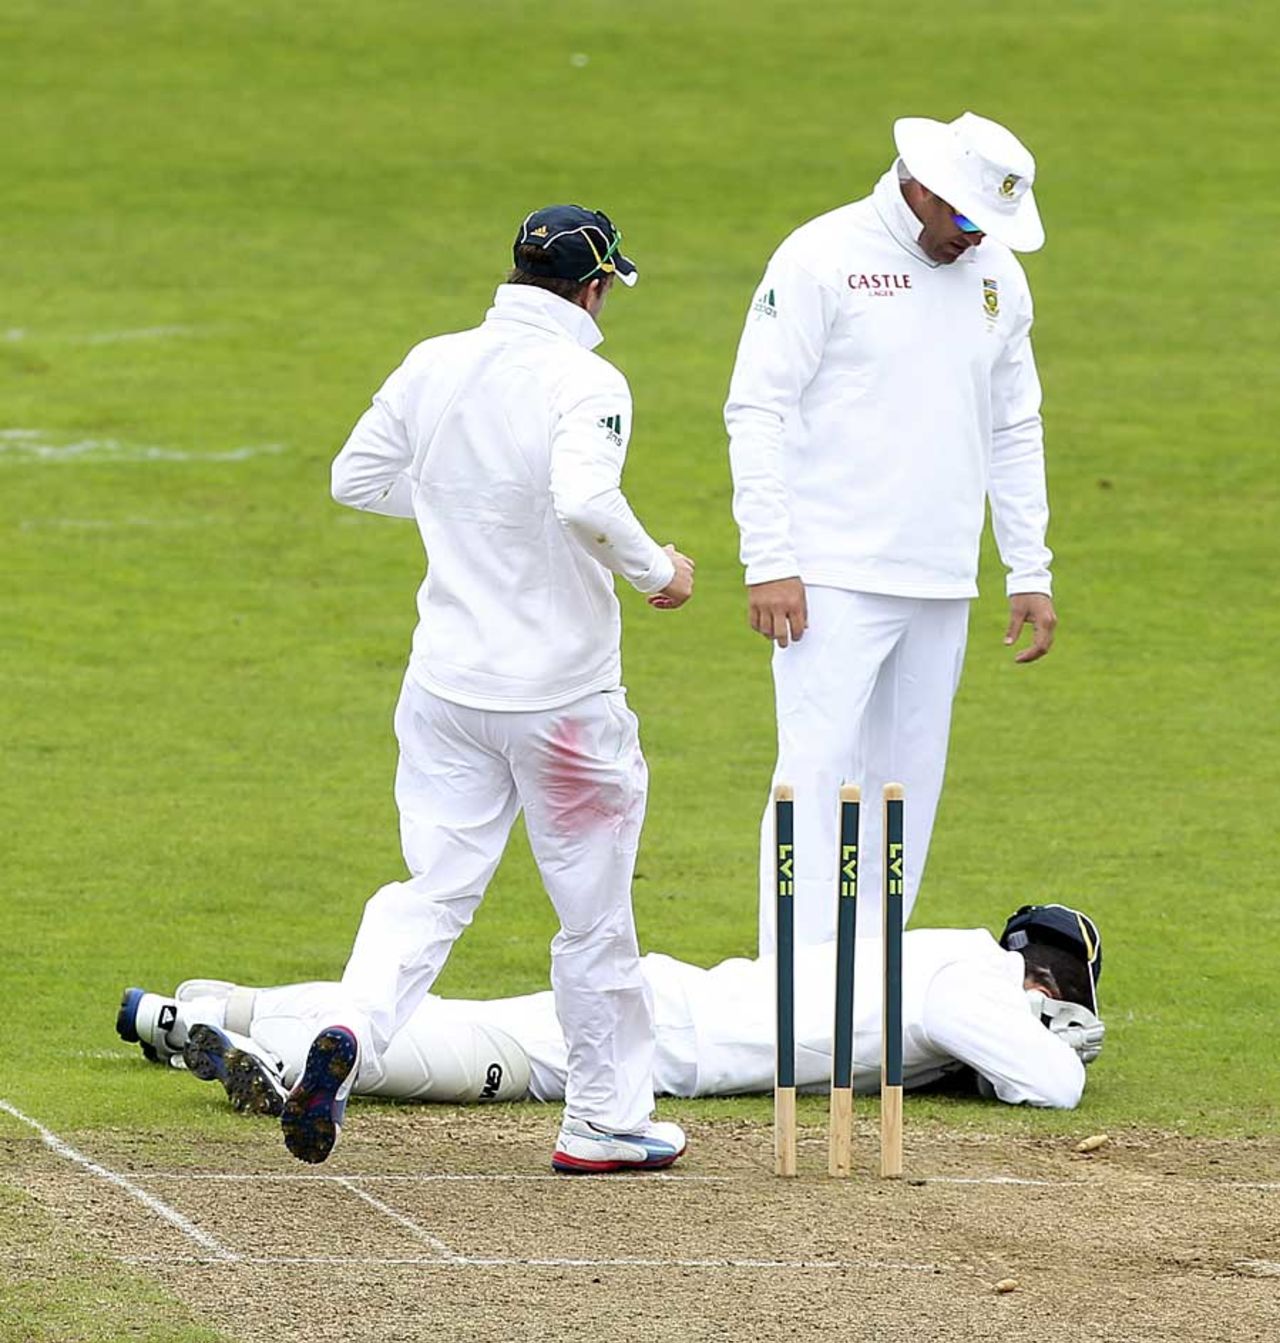 Mark Boucher lies on the ground after being struck in the eye, Somerset v South Africans, Tour Match, Taunton, 1st day, July 9, 2012